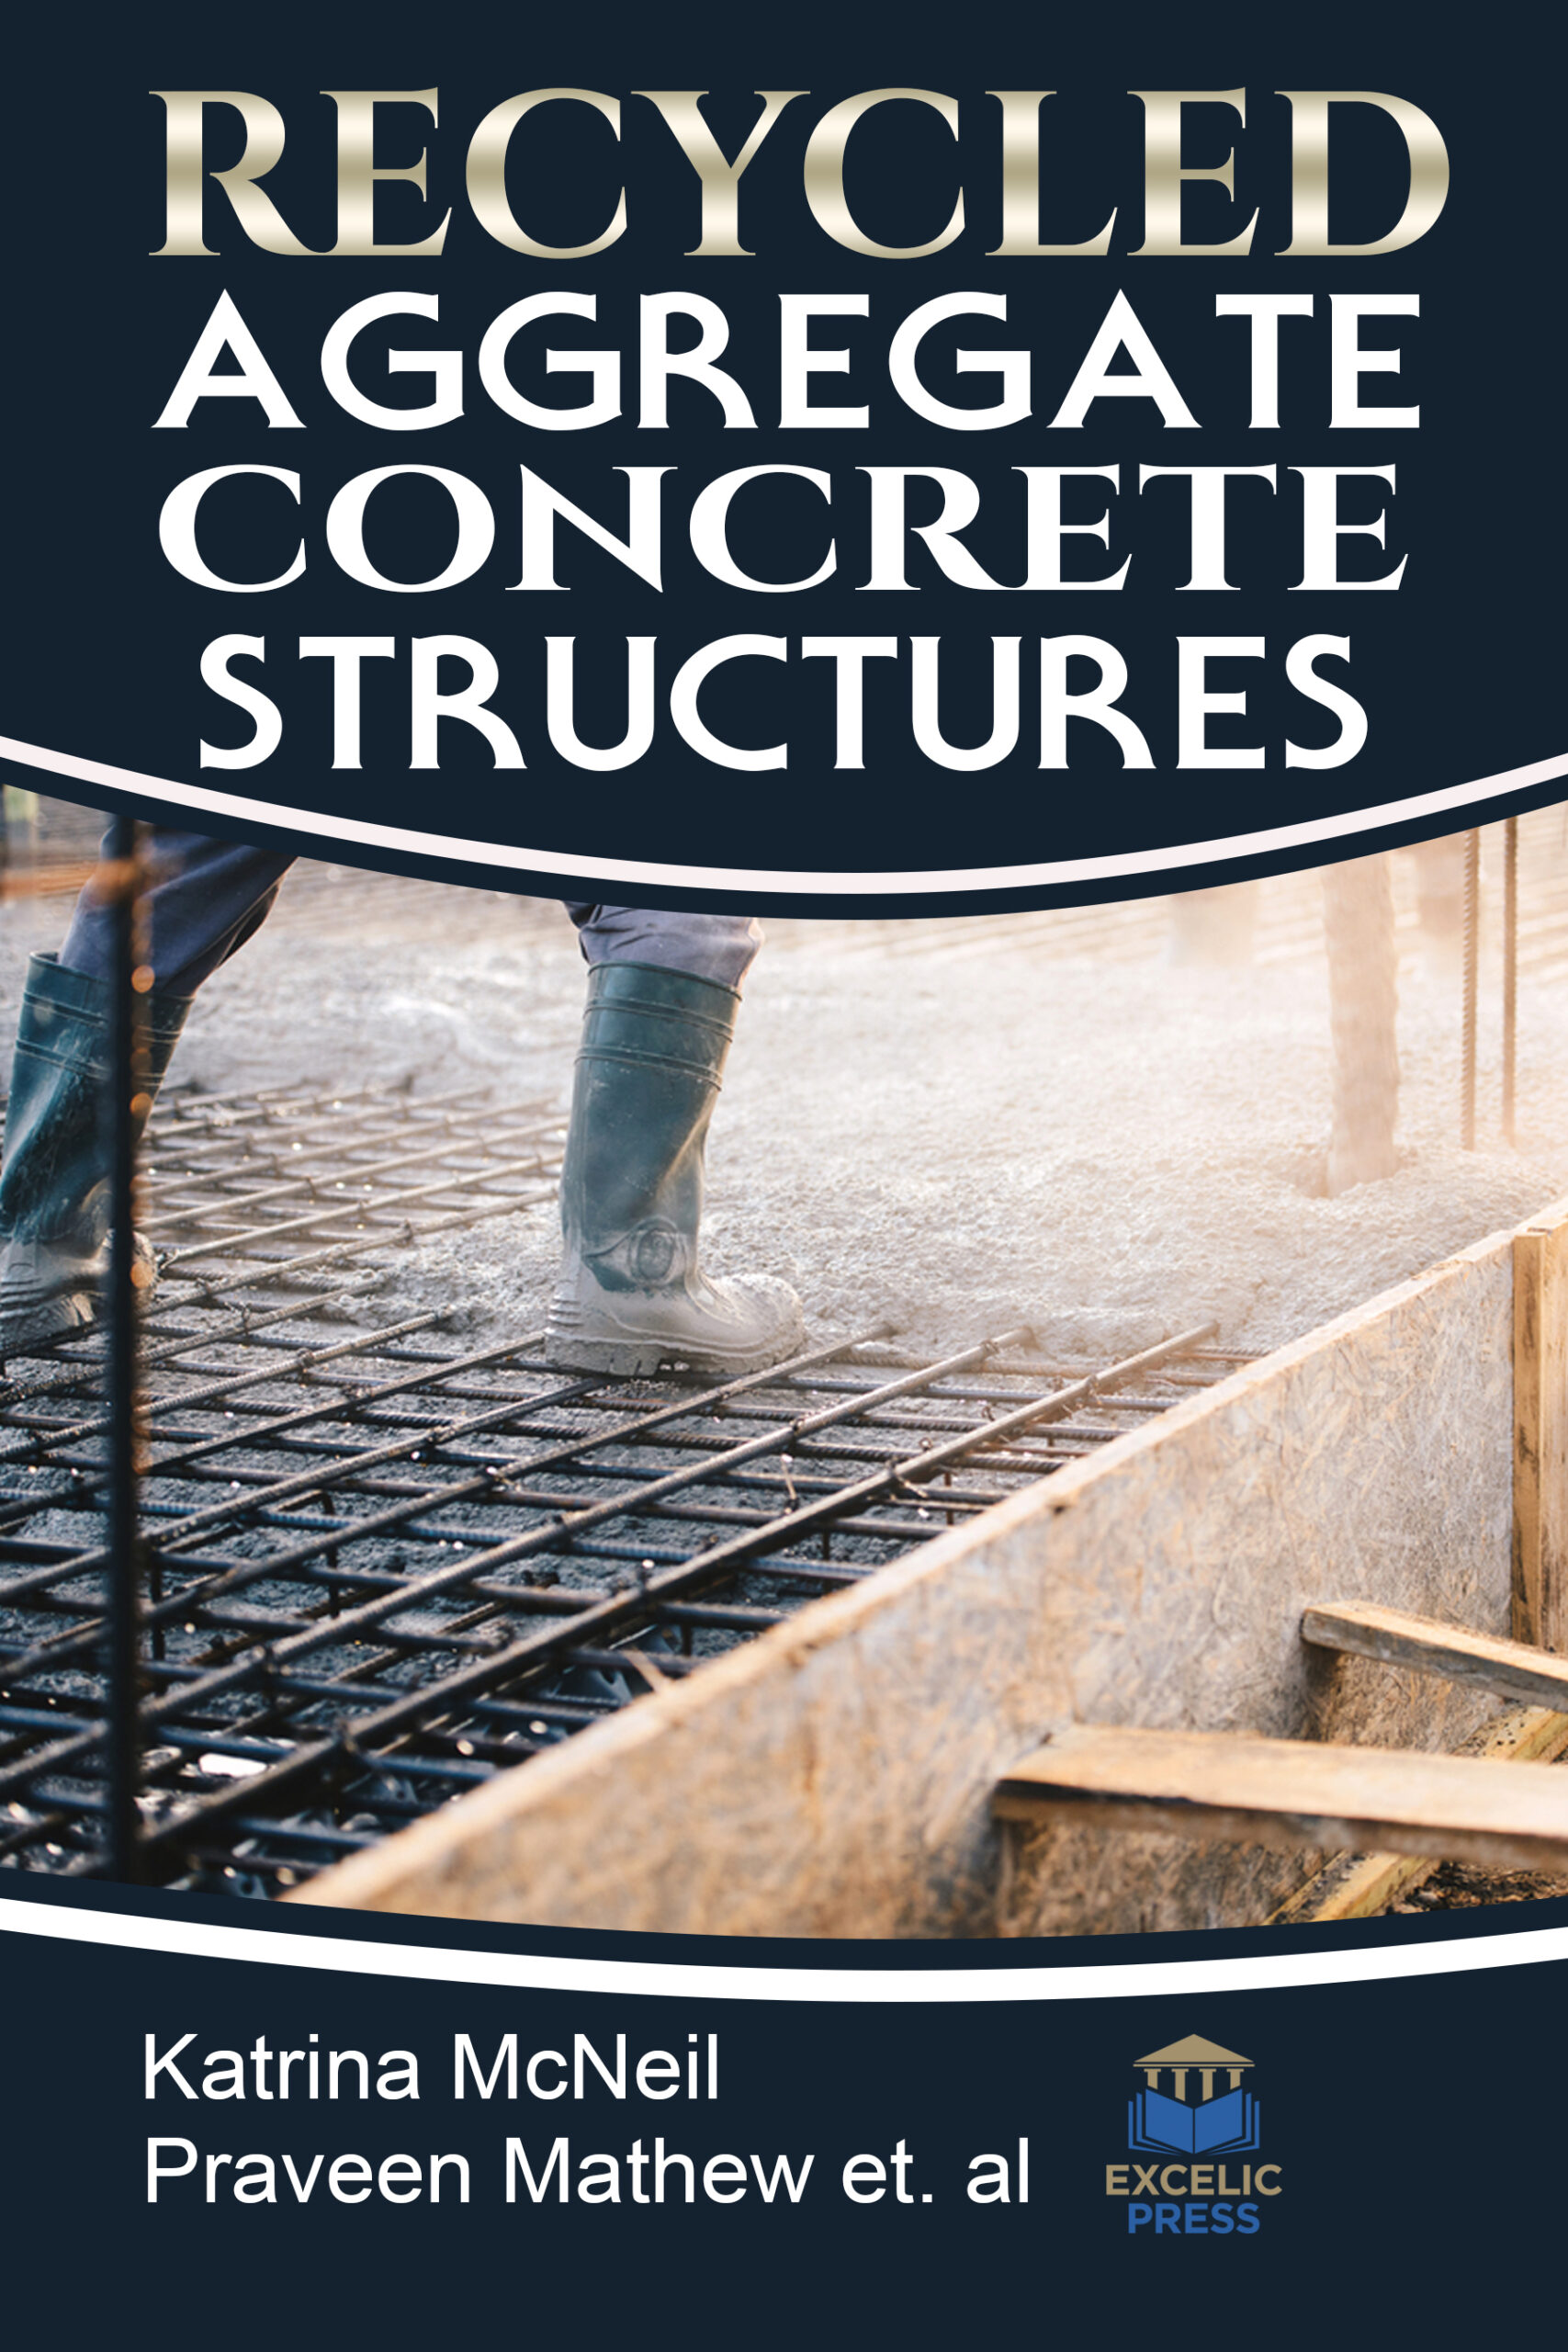 research paper on recycled aggregate concrete